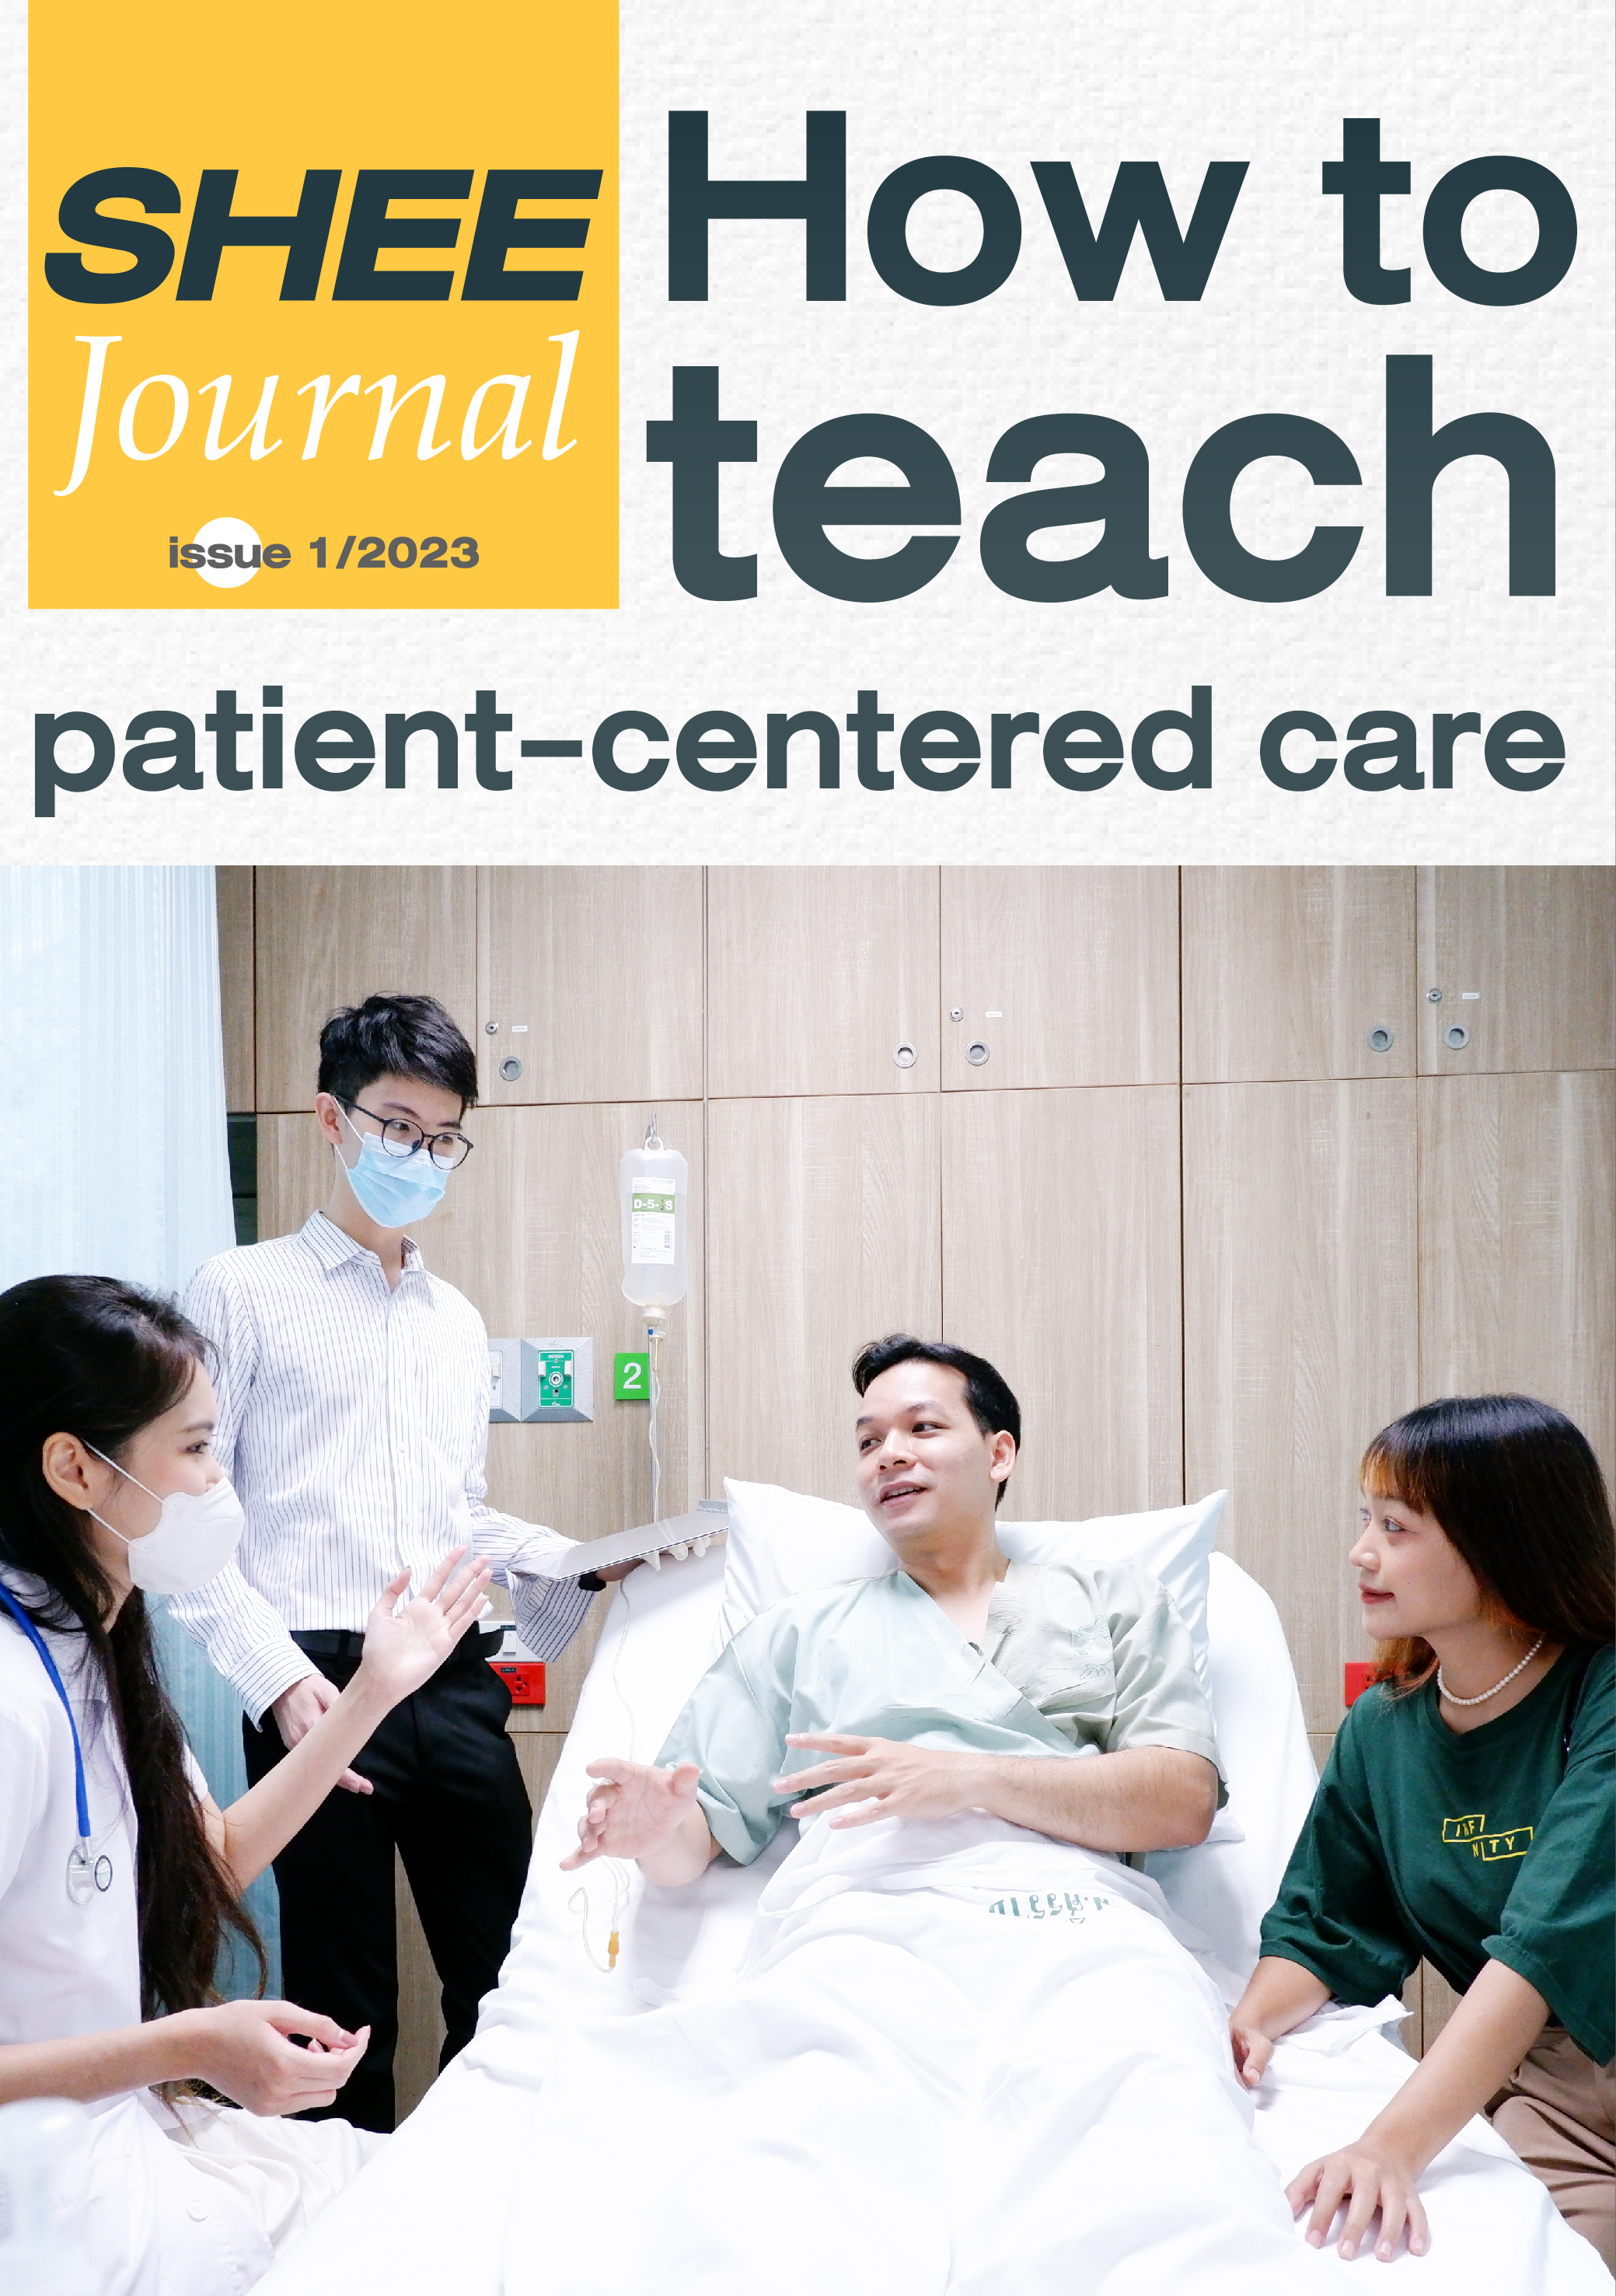 Journal Issue 1, 2023 เรื่อง How to teach patient-centered care